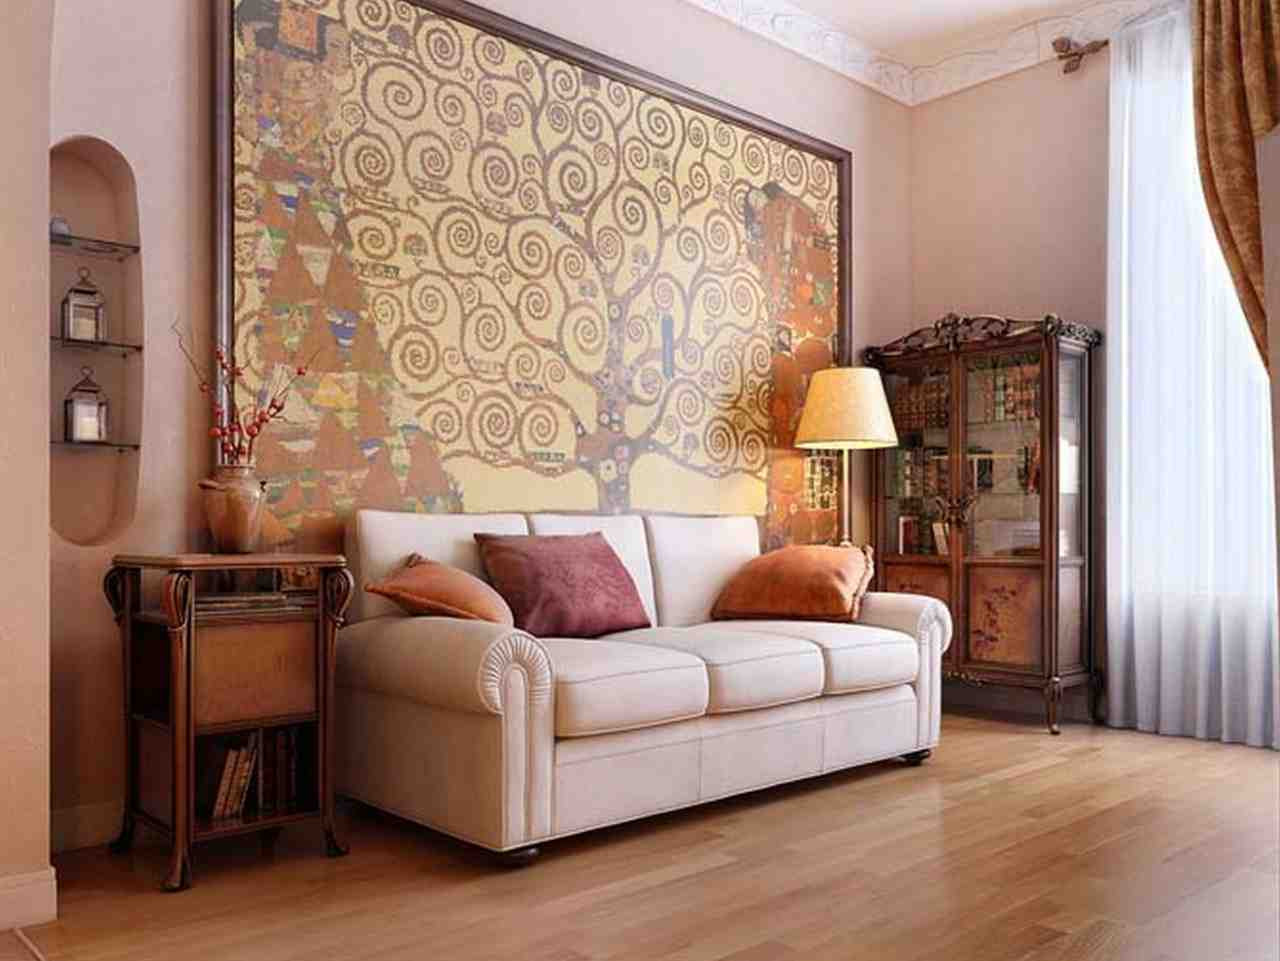 Wall Pieces For Living Room
 Wall Decor Ideas for Living Room Decor IdeasDecor